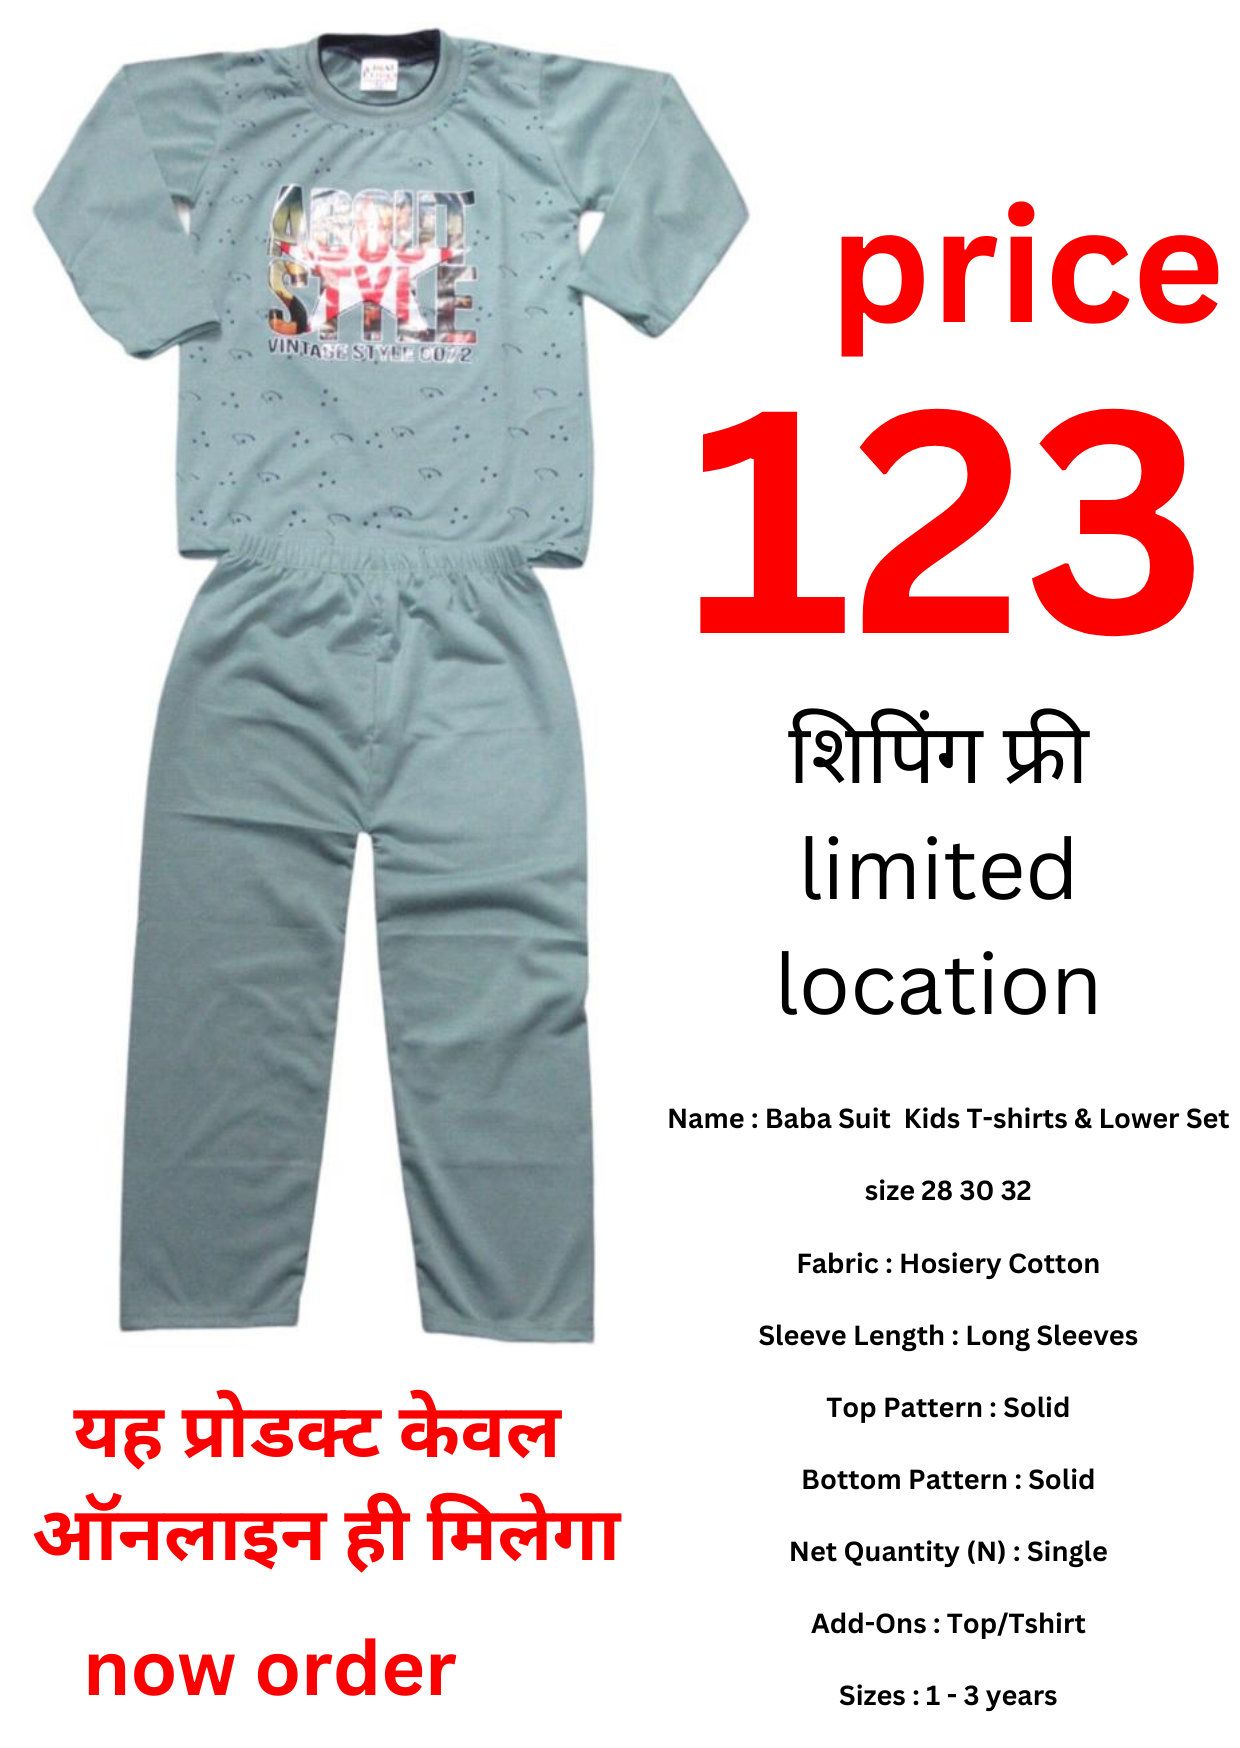 Boys Baba Suit in Mumbai at best price by Bhatt Dresses - Justdial